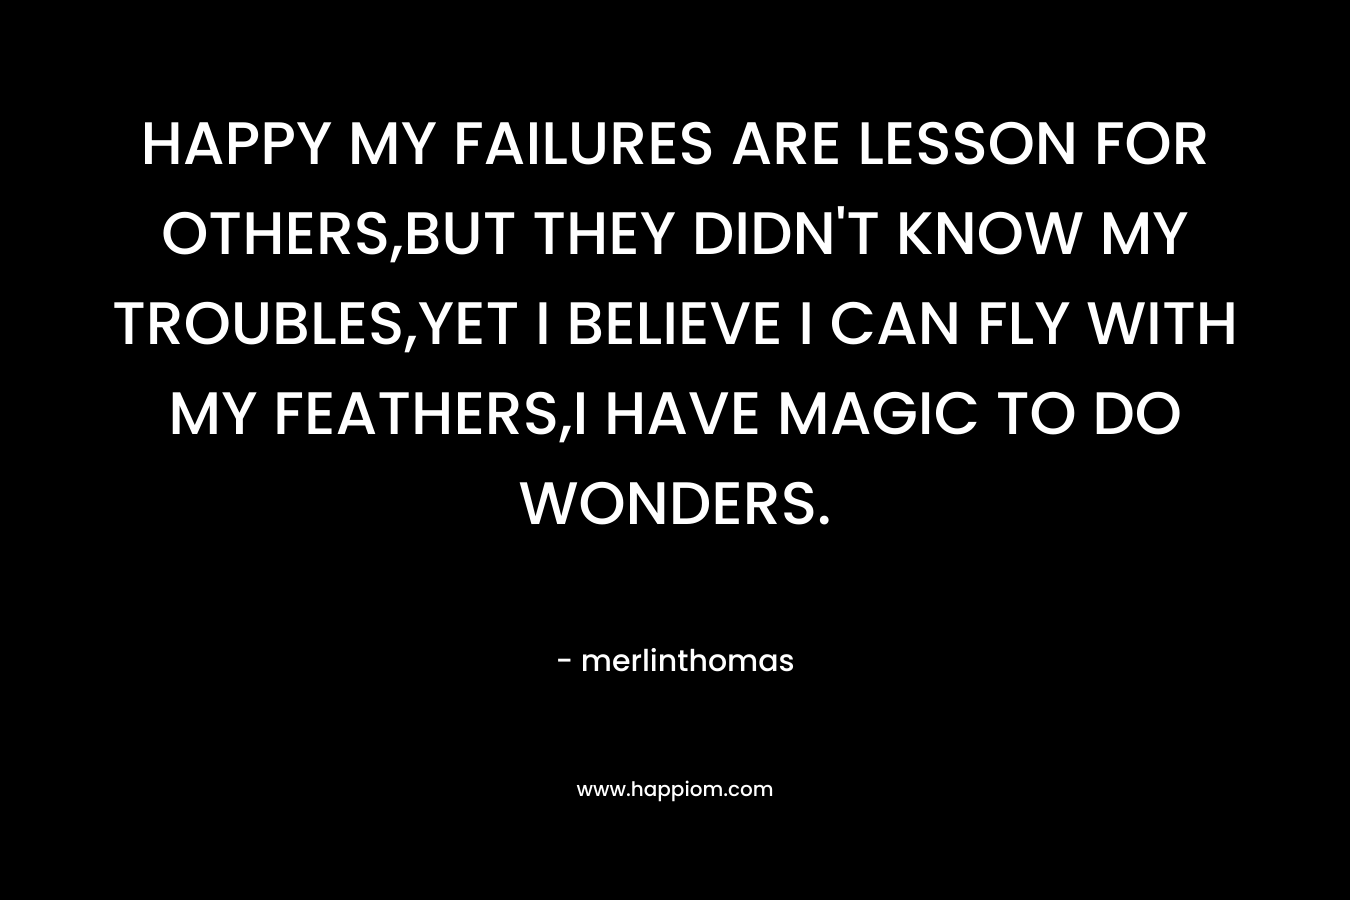 HAPPY MY FAILURES ARE LESSON FOR OTHERS,BUT THEY DIDN’T KNOW MY TROUBLES,YET I BELIEVE I CAN FLY WITH MY FEATHERS,I HAVE MAGIC TO DO WONDERS. – merlinthomas